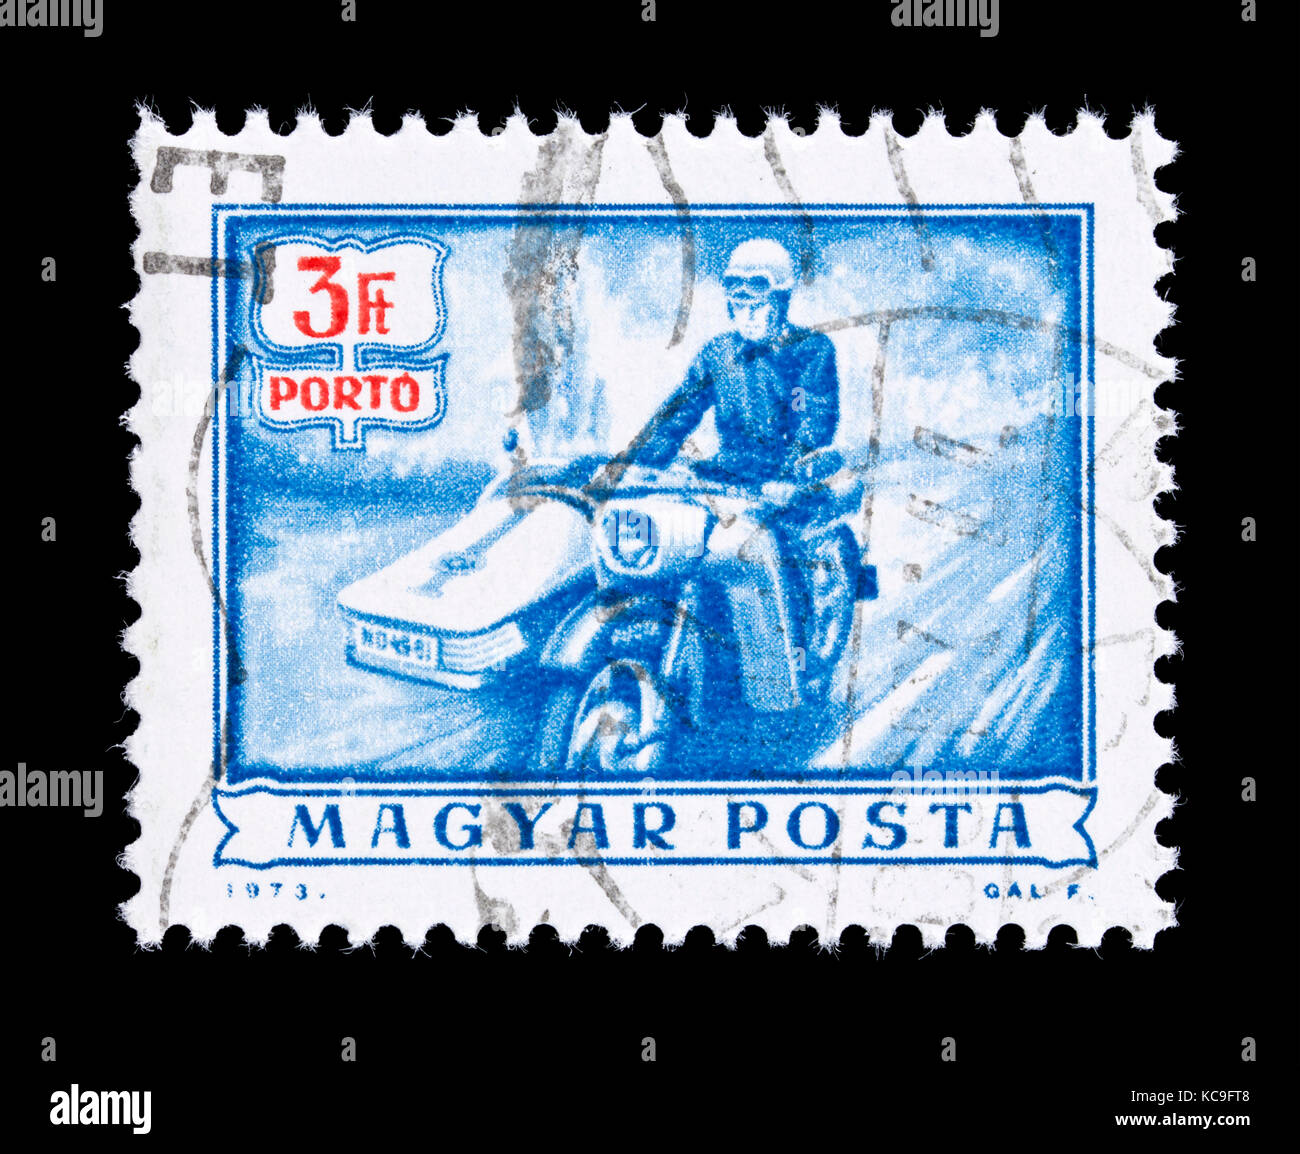 Postage due stamp from Hungary depicting a mailman on a motorcycle with a sidecar. Stock Photo